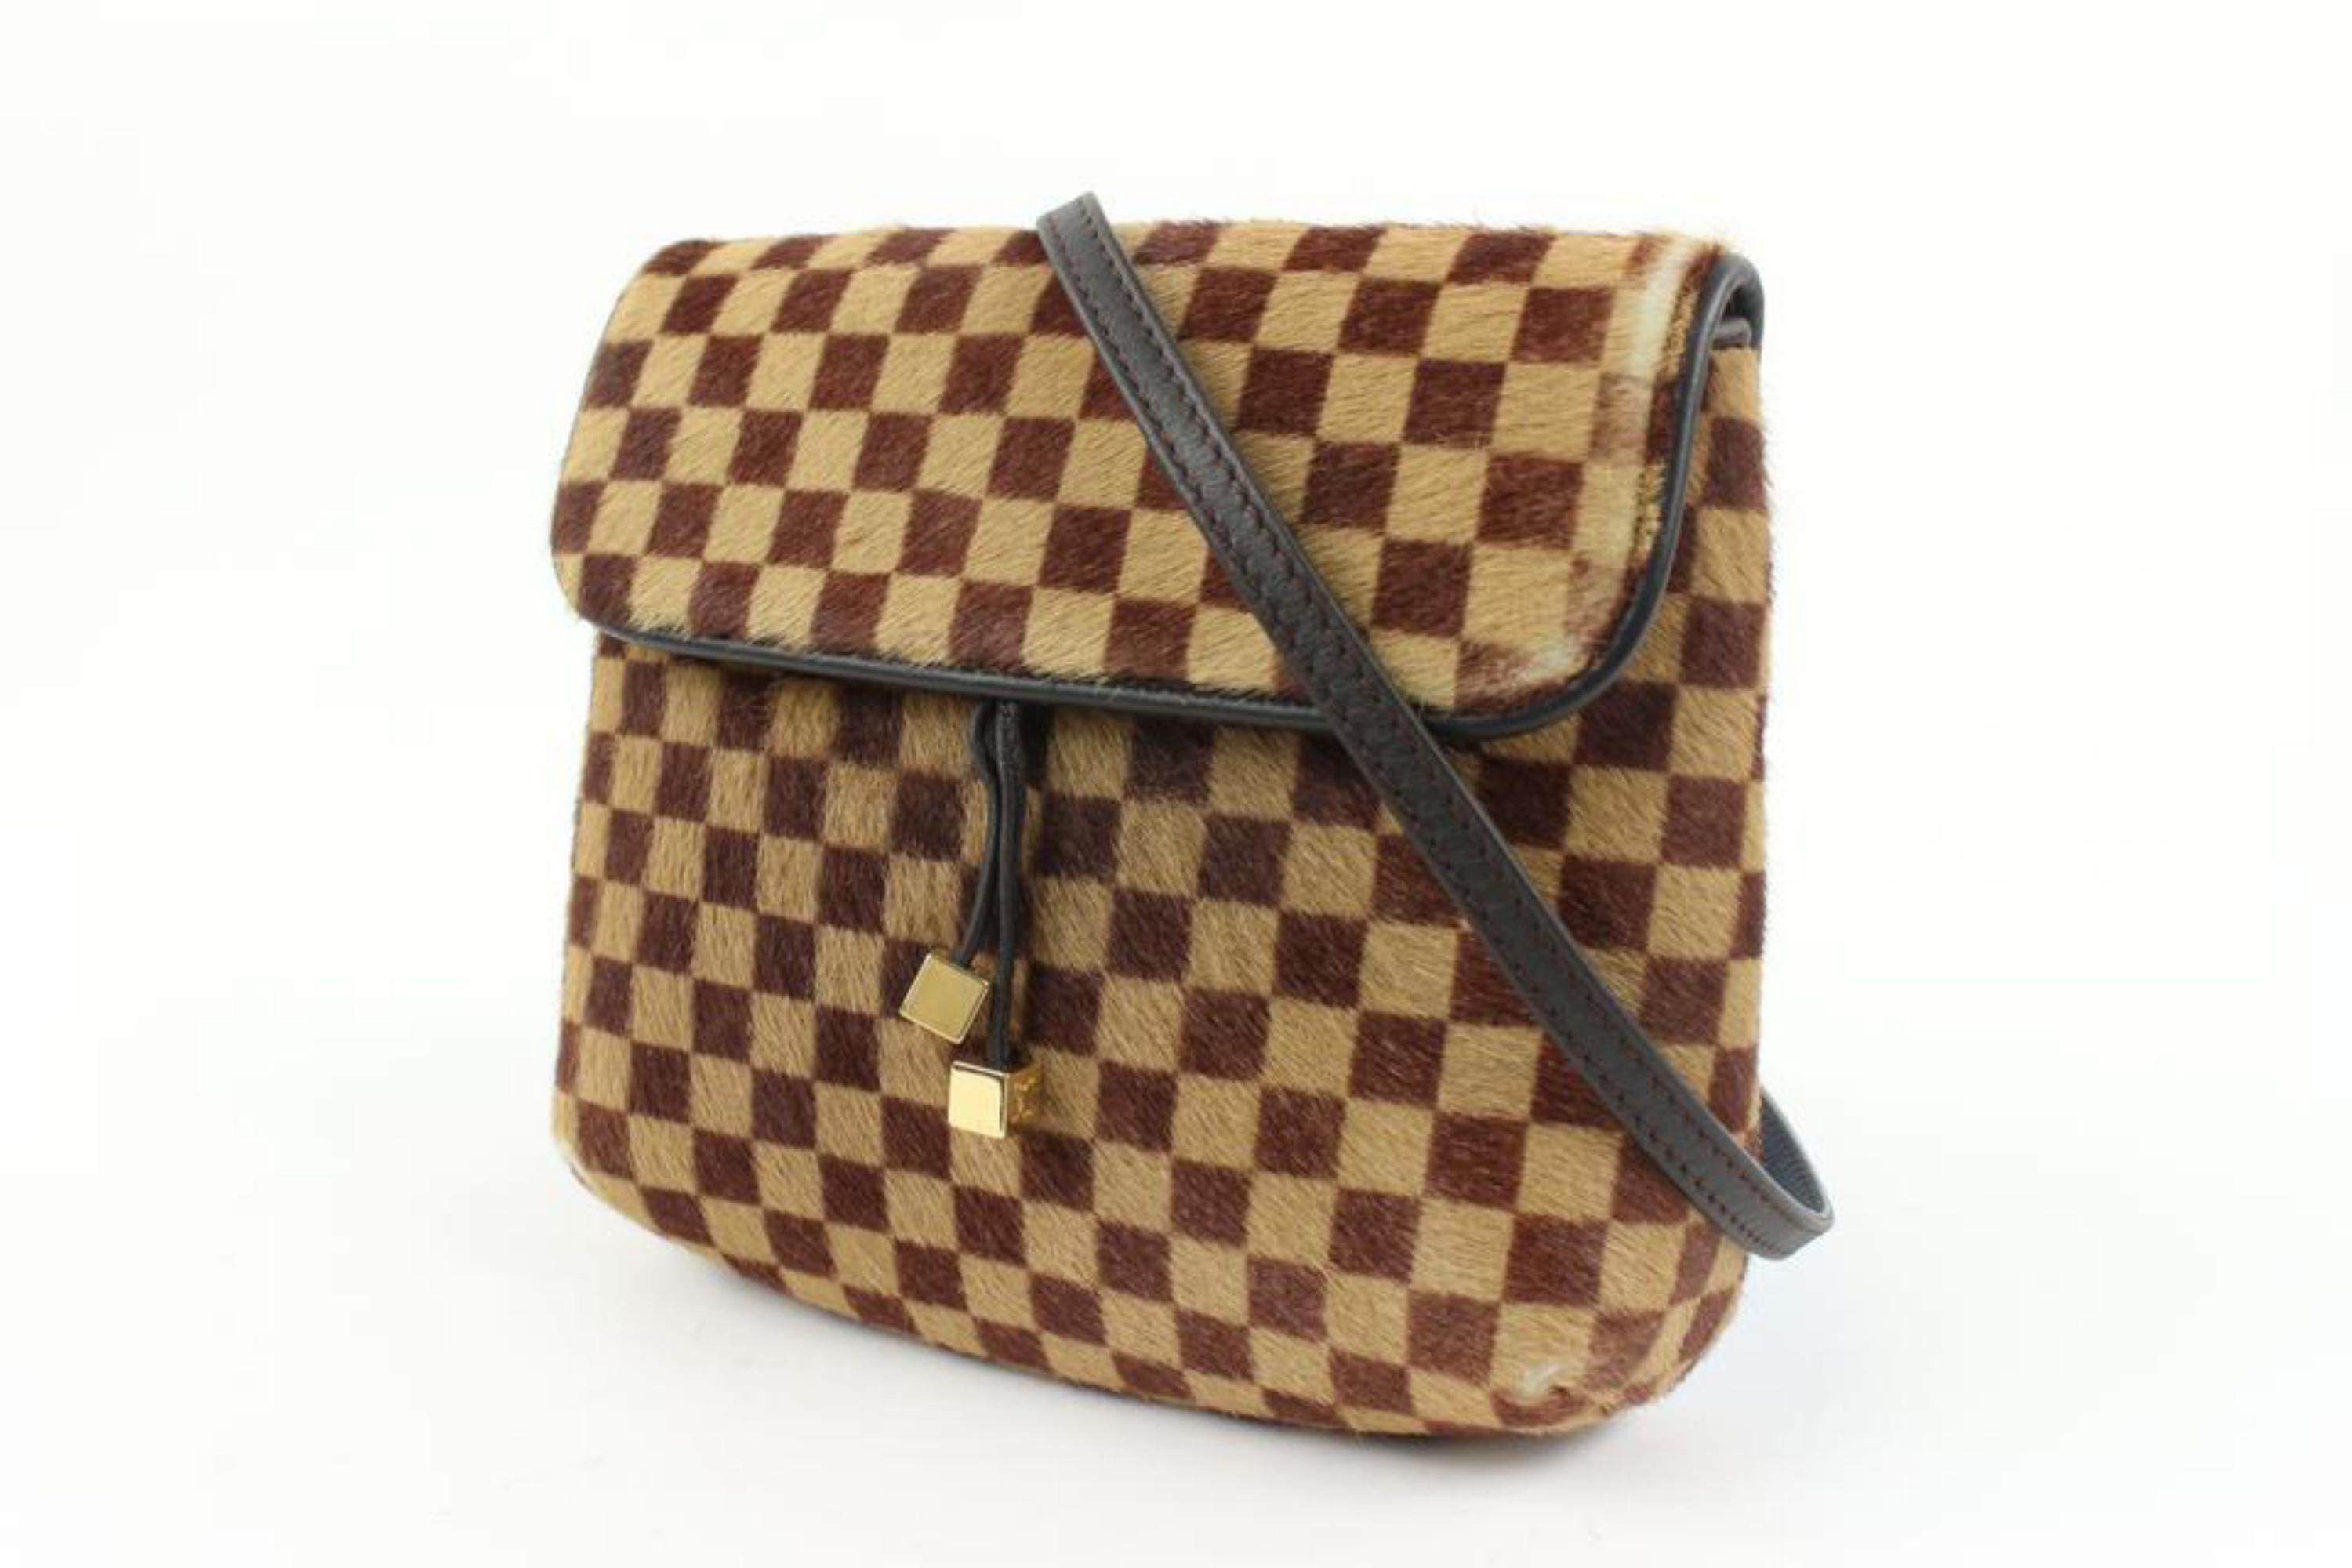 Louis Vuitton Calf Hair Damier Sauvage Gazelle Bumbag Waist Pouch Crossbody 76lk33s
Date Code/Serial Number: CE1002
Made In: Italy
Measurements: Length:  6.5